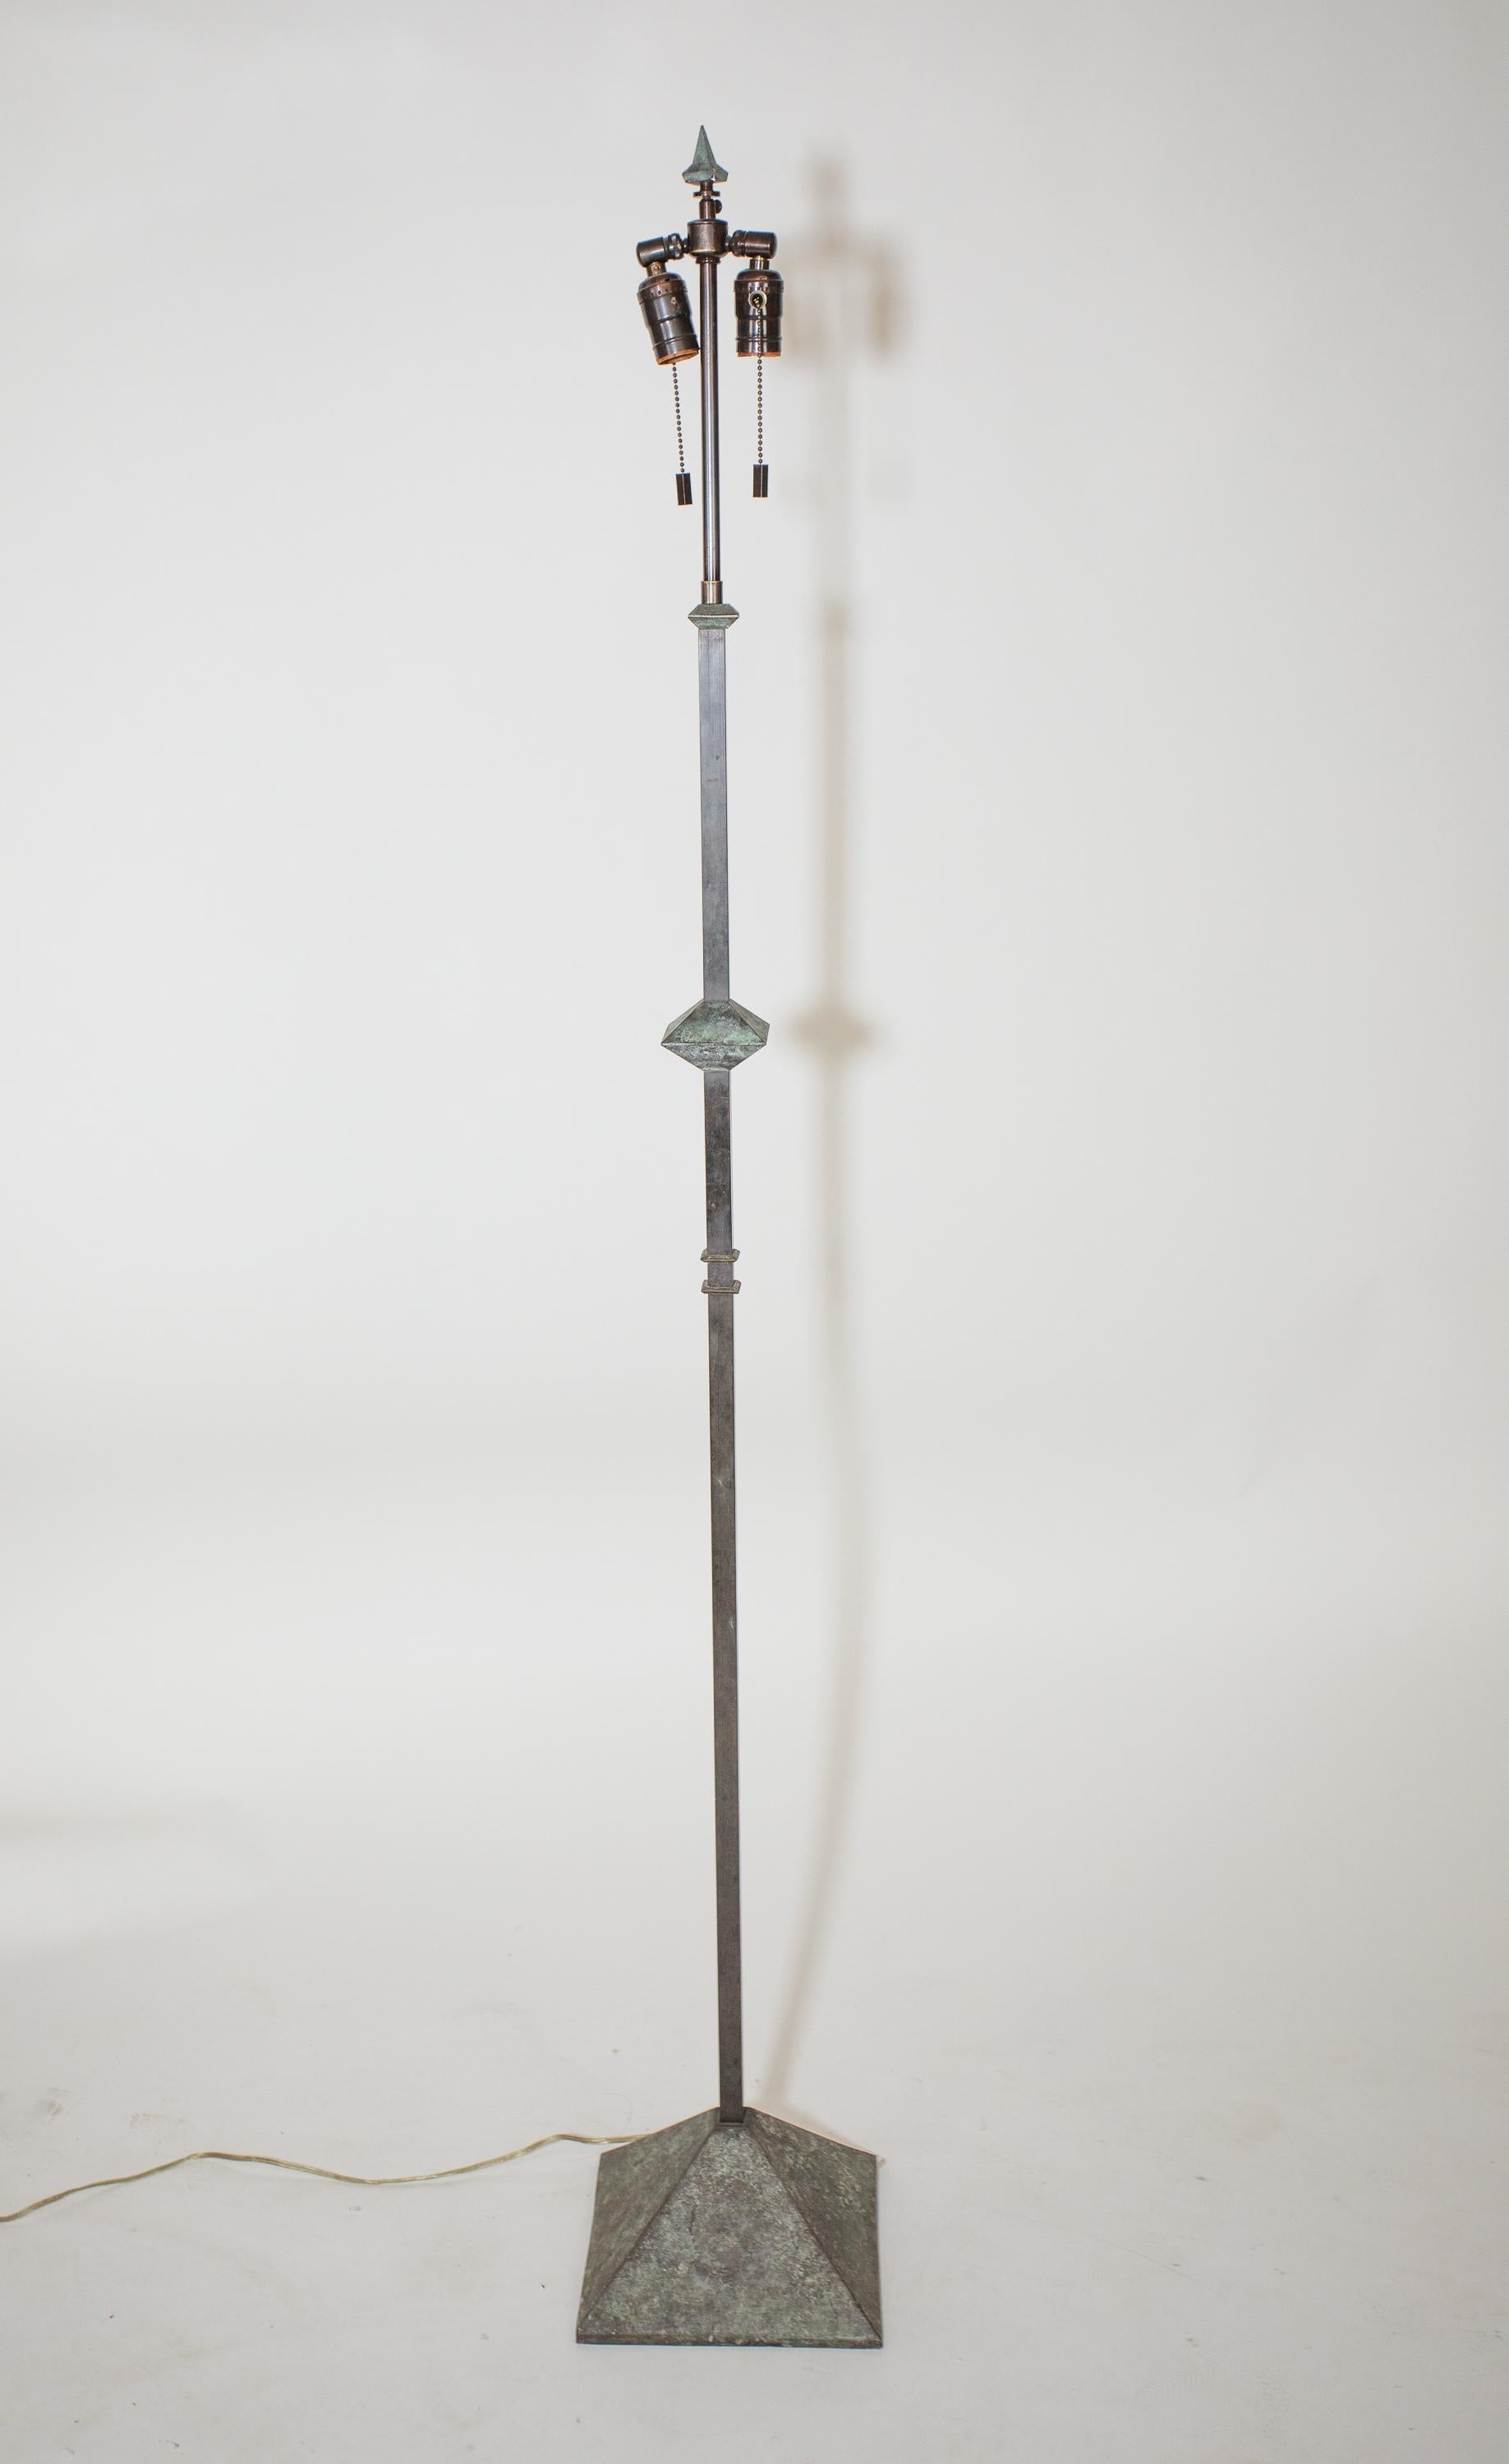 A bronze floor lamp from Karl springer
Original surface
Copy of a Giacometti design, Very Heavy.